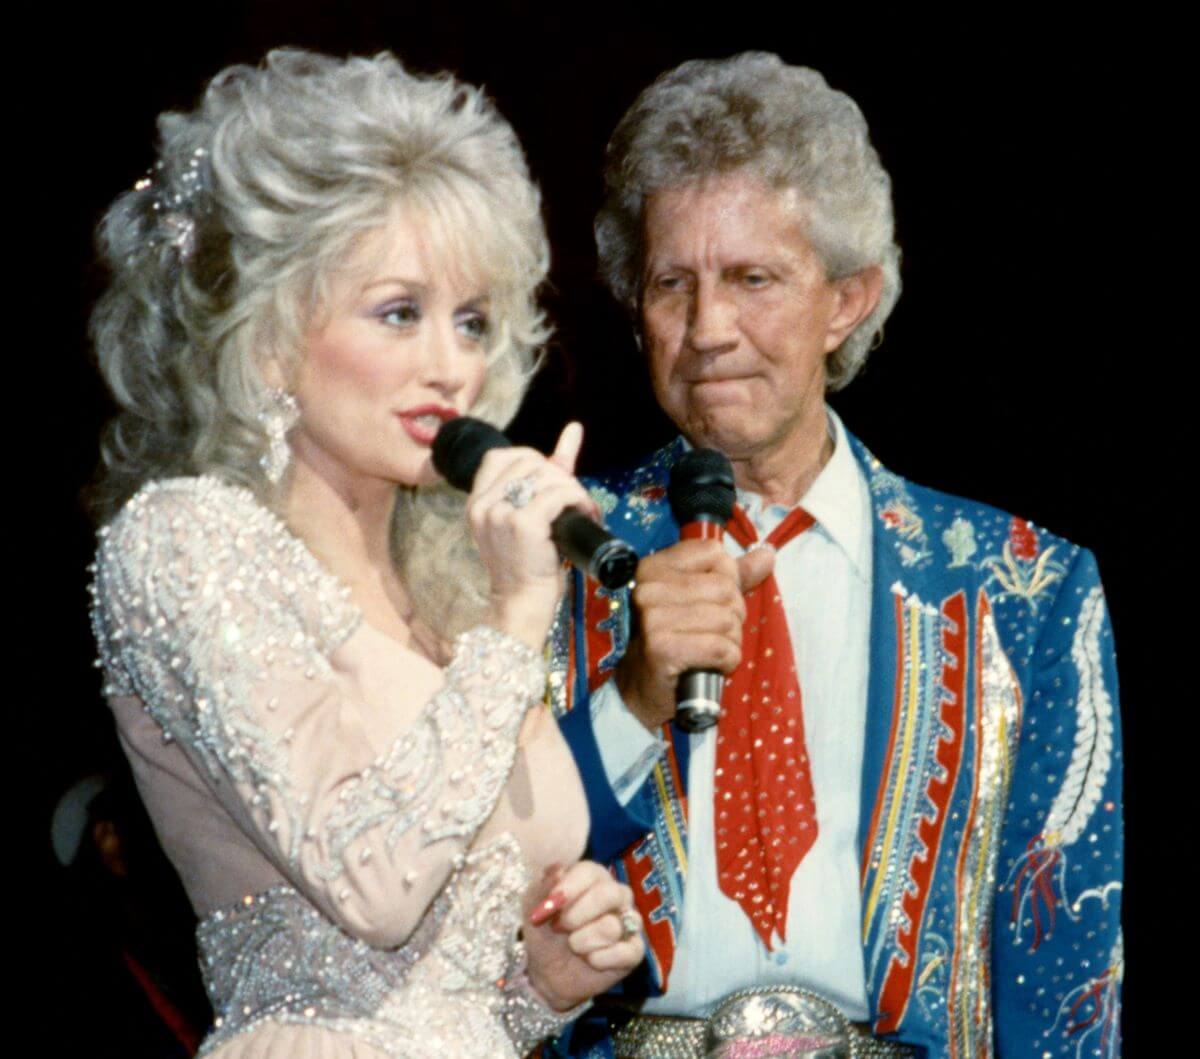 Porter Wagoner holds a microphone and watches Dolly Parton, who speaks into a microphone.